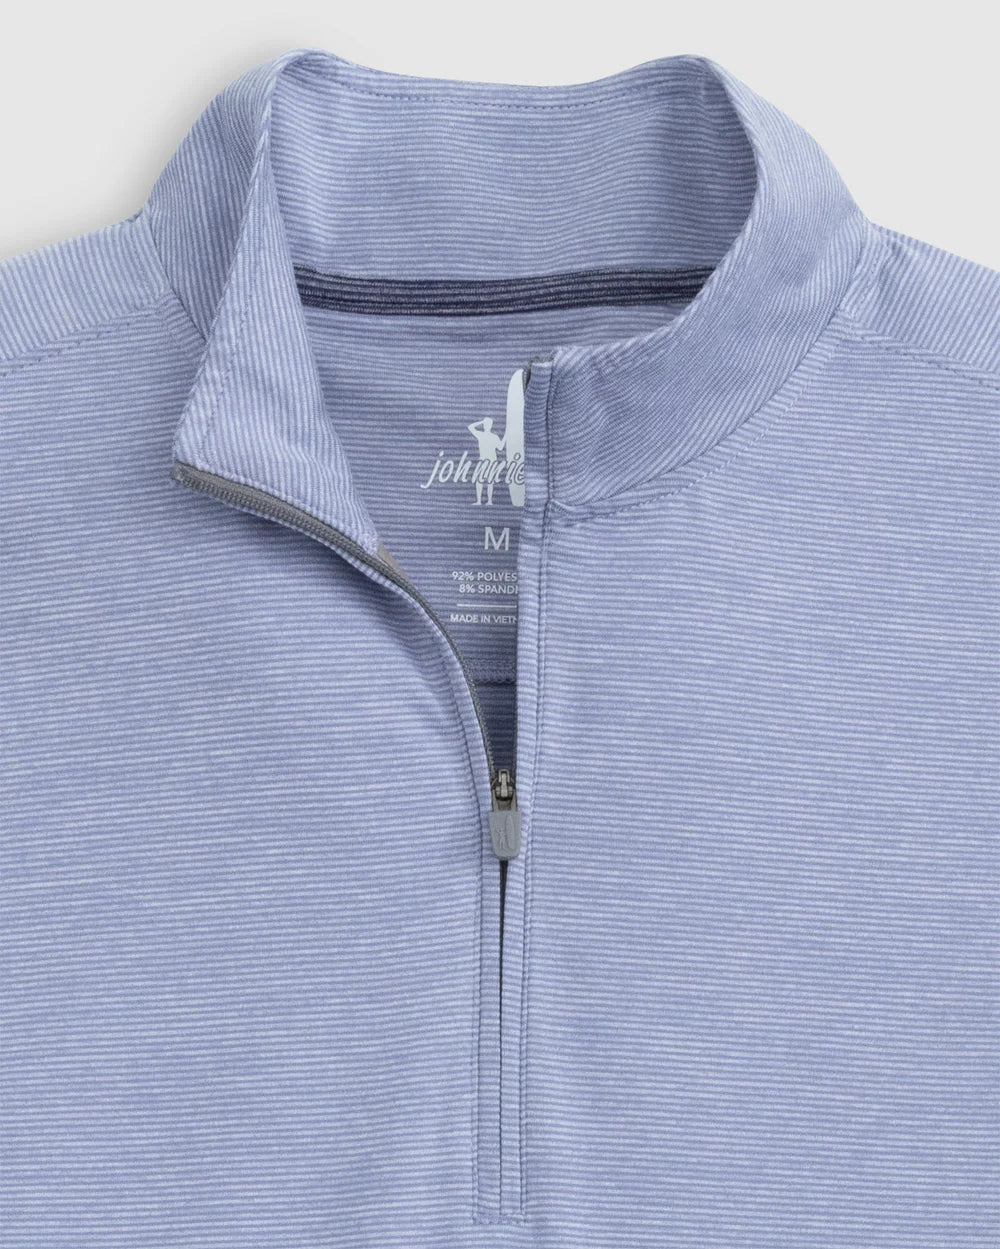 Vaughn Striped Performance 1/4 Zip Pullover- Noreaster